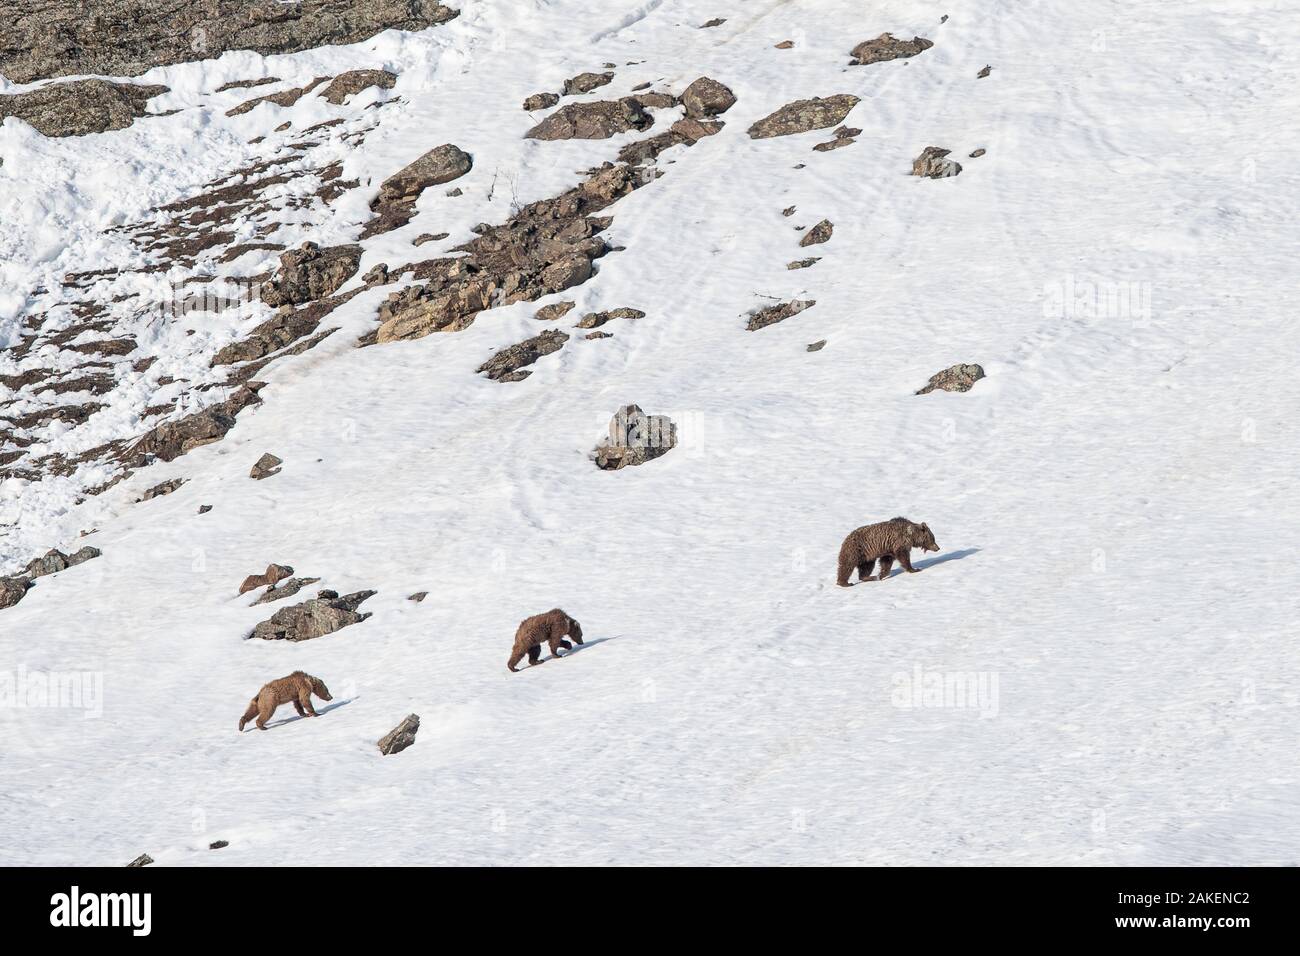 Himalayan brown bear (Ursus arctos isabellinus) female with two young cubs climbing up snowy slope. Western Ladakh, northern India. Stock Photo